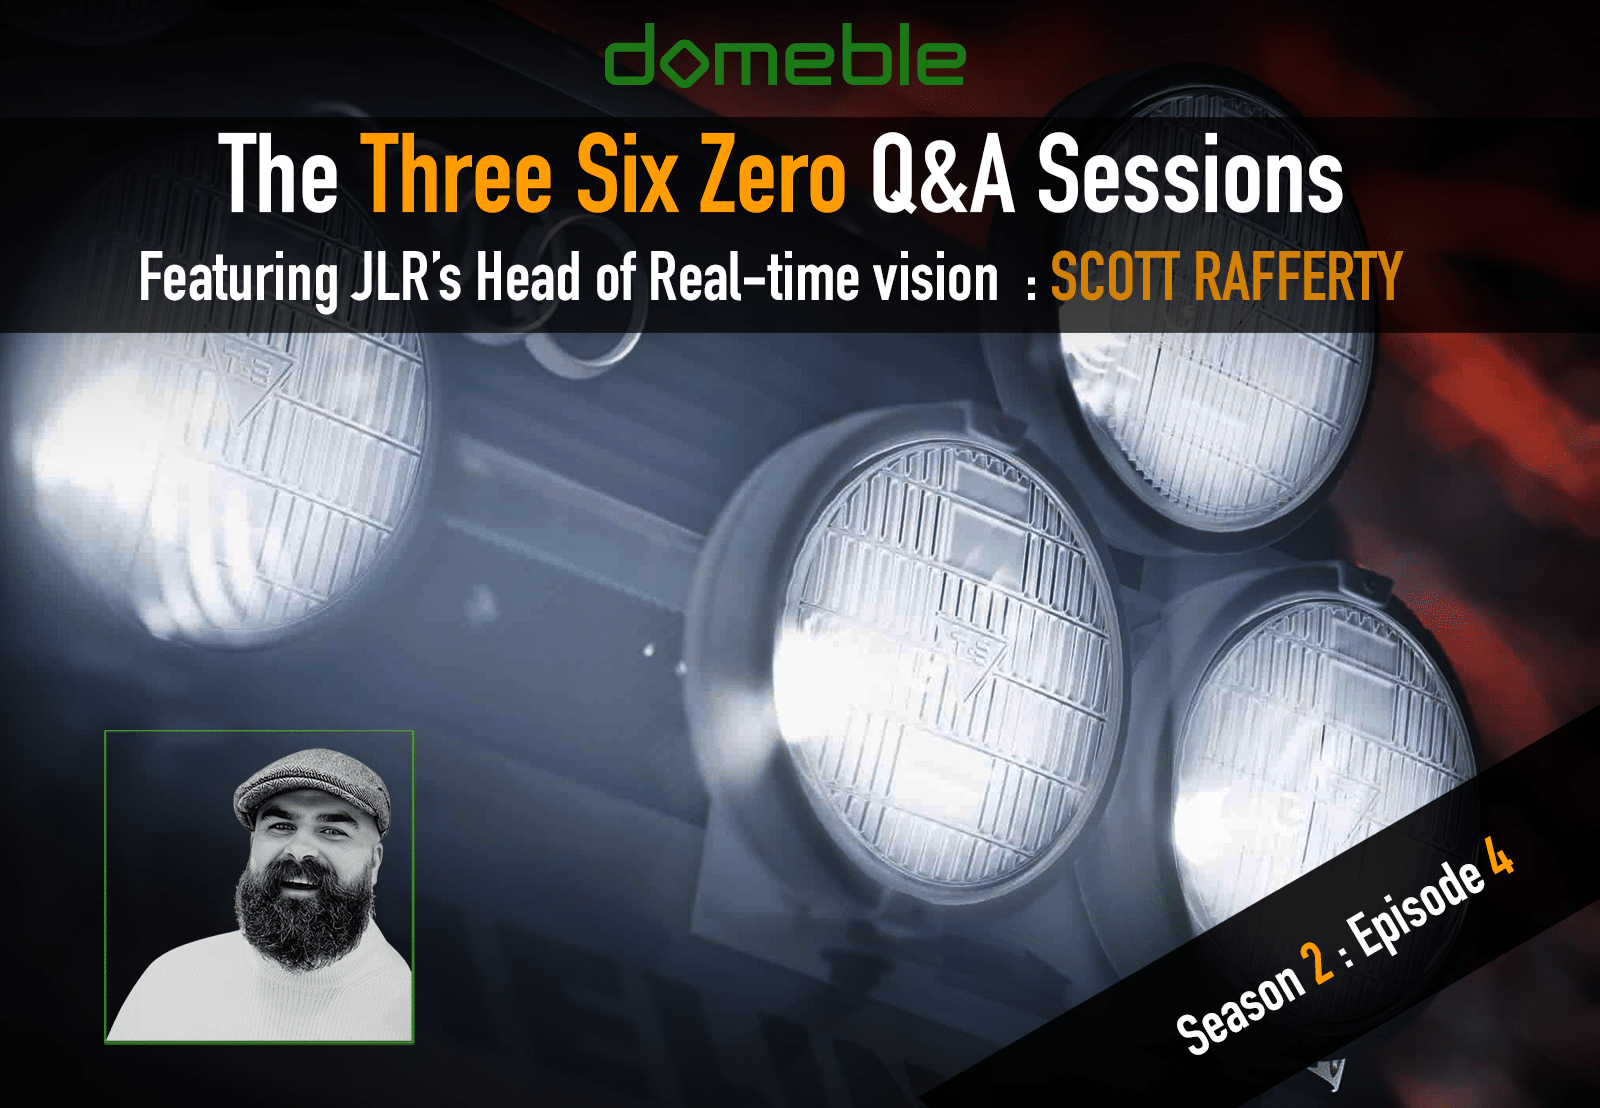 The Domeble 360 Questions: Featuring Scott Rafferty- Head of Real Time Vision at JLR